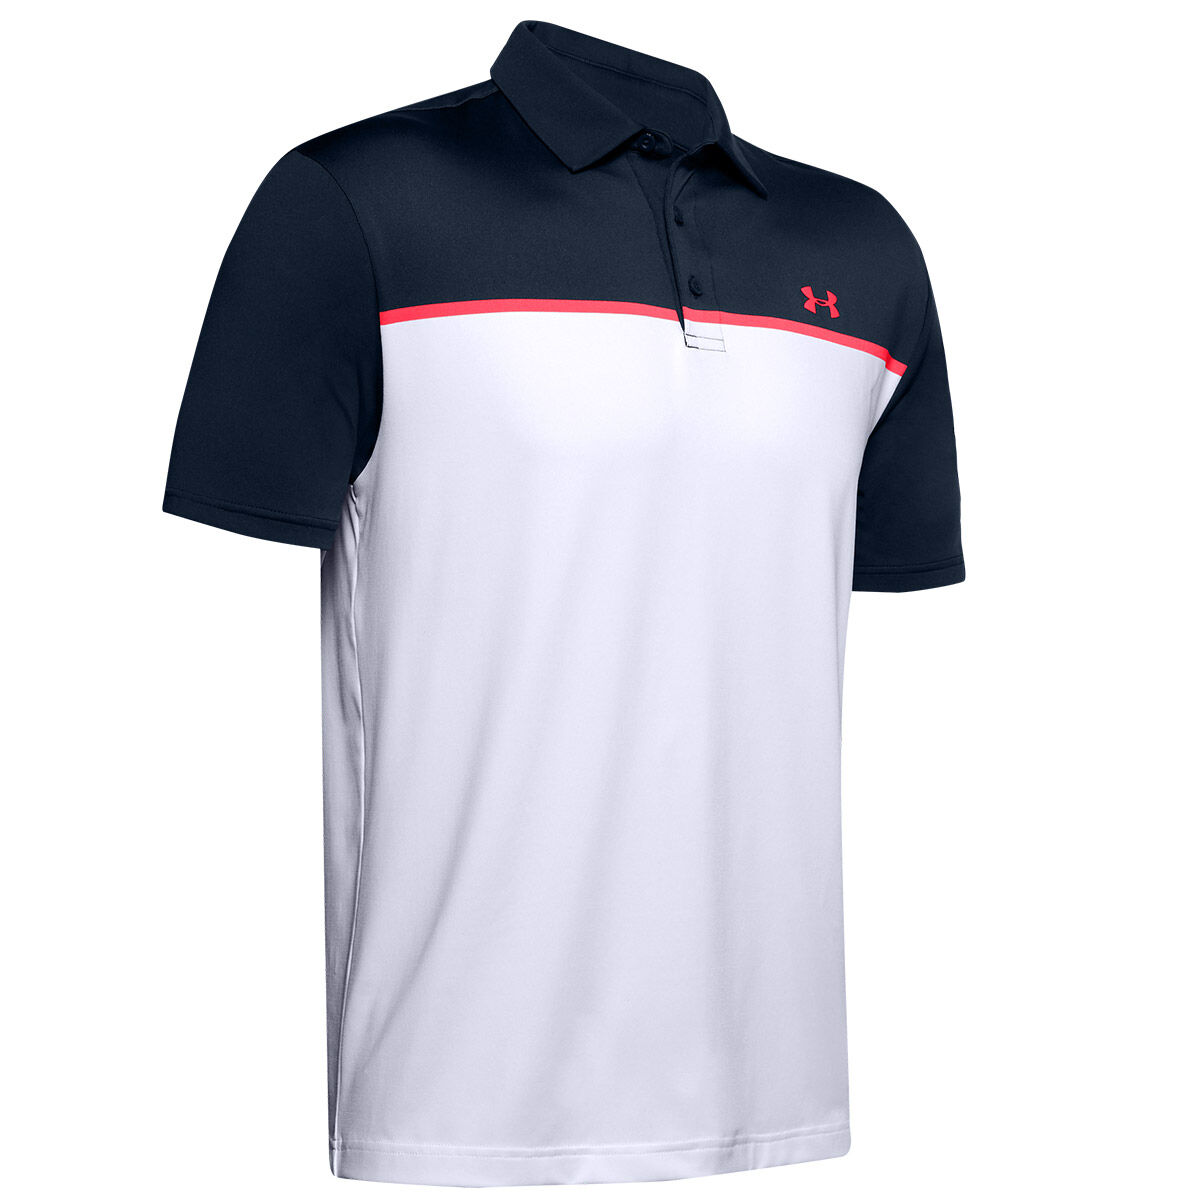 Playoff 2.0 Chest Engineered Polo Shirt 